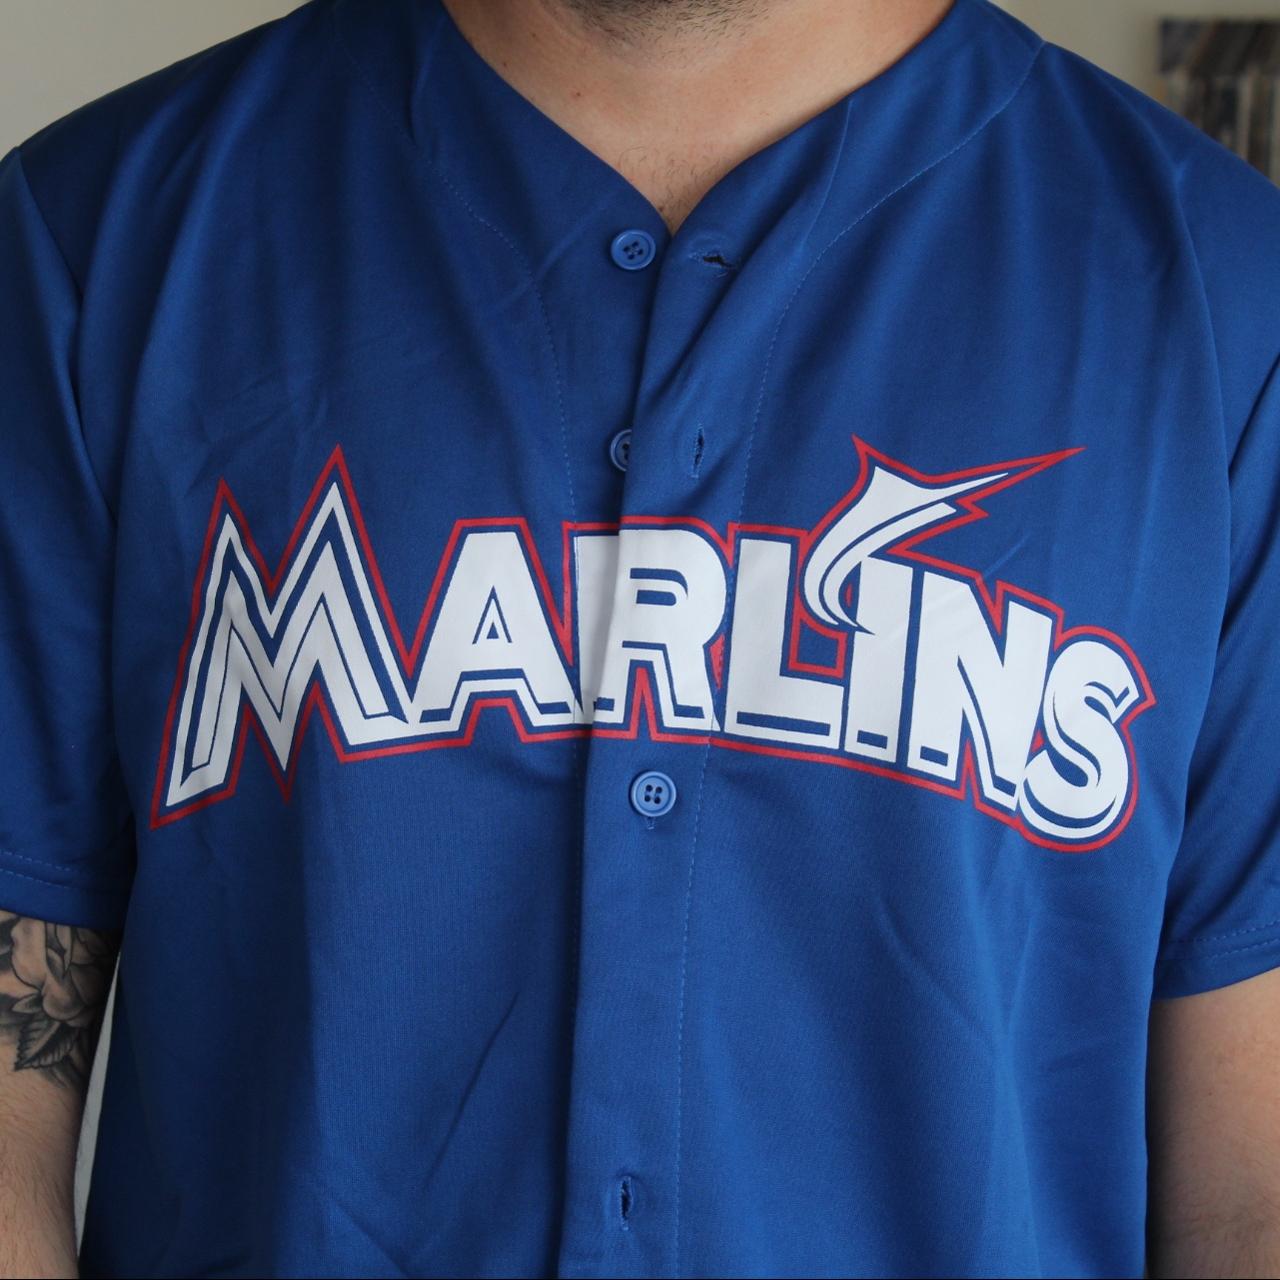 Miami Marlins Mexican Heritage Celebration Jersey Adult XL